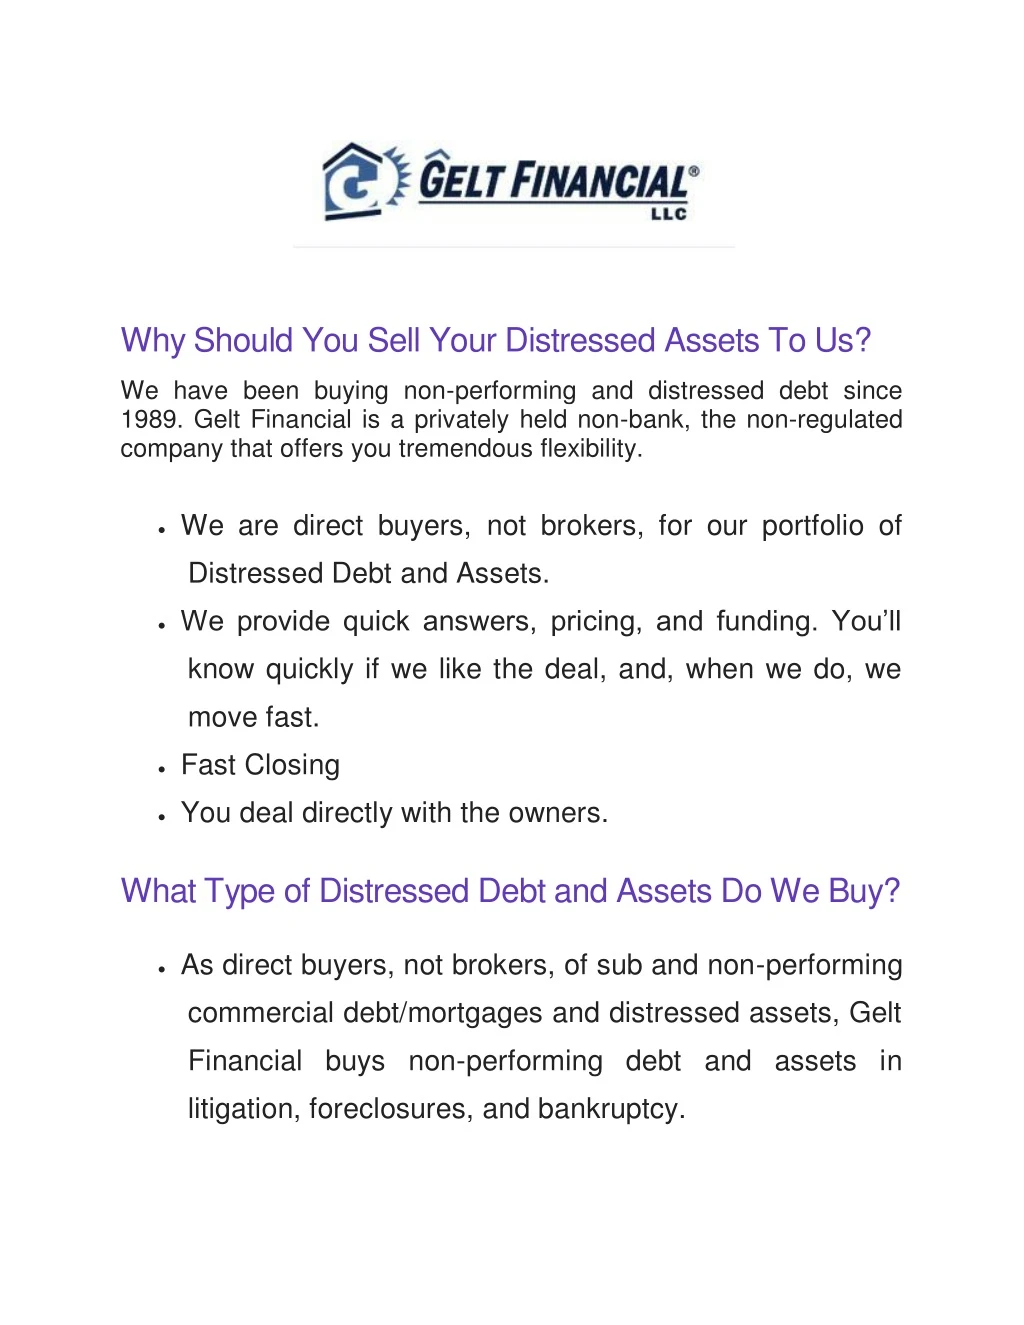 why should you sell your distressed assets to us